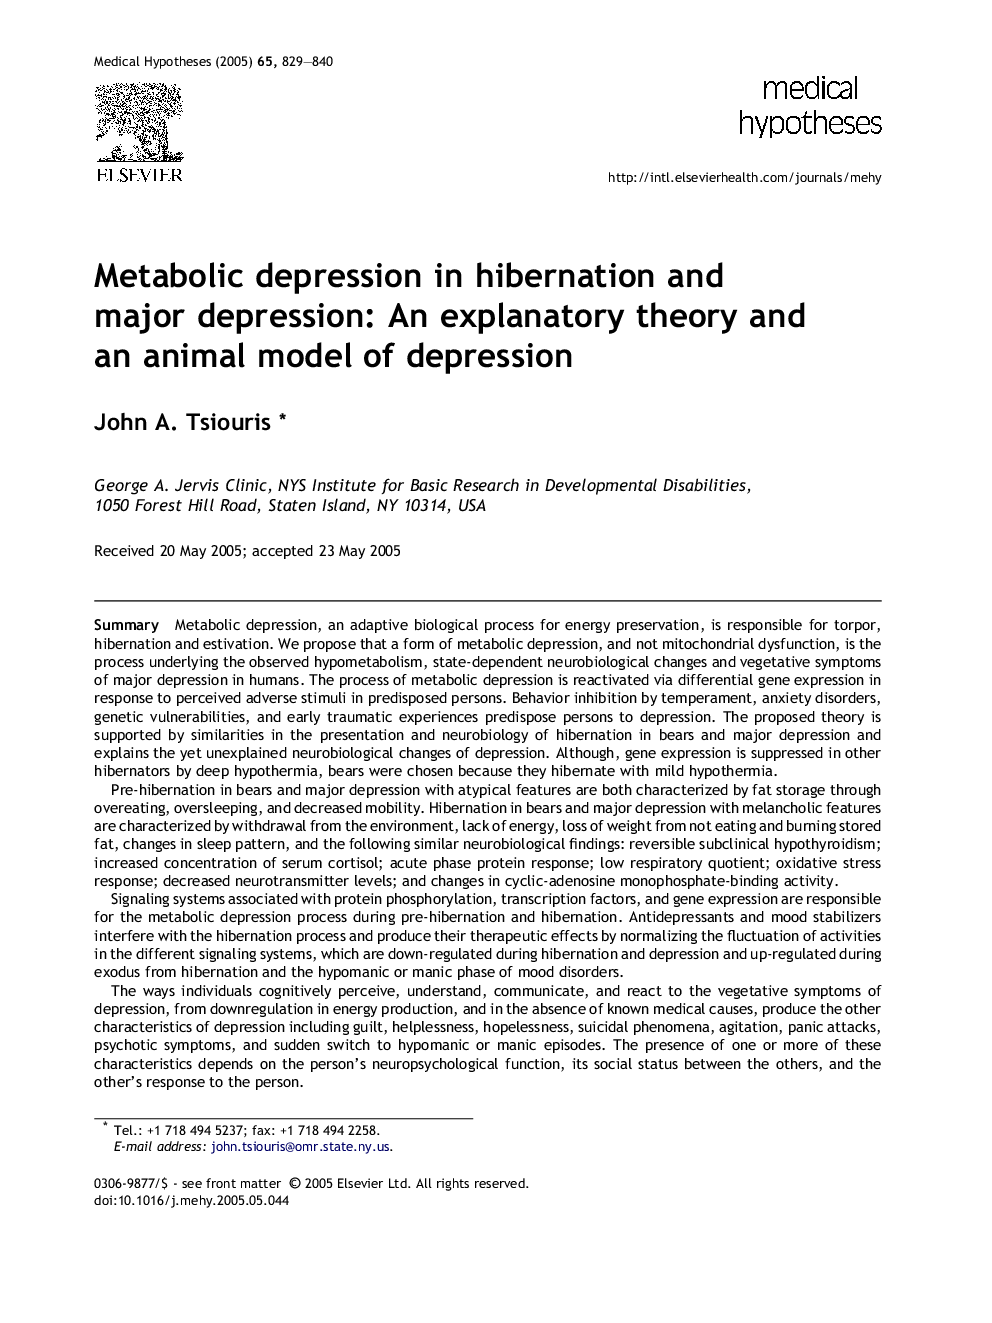 Metabolic depression in hibernation and major depression: An explanatory theory and an animal model of depression